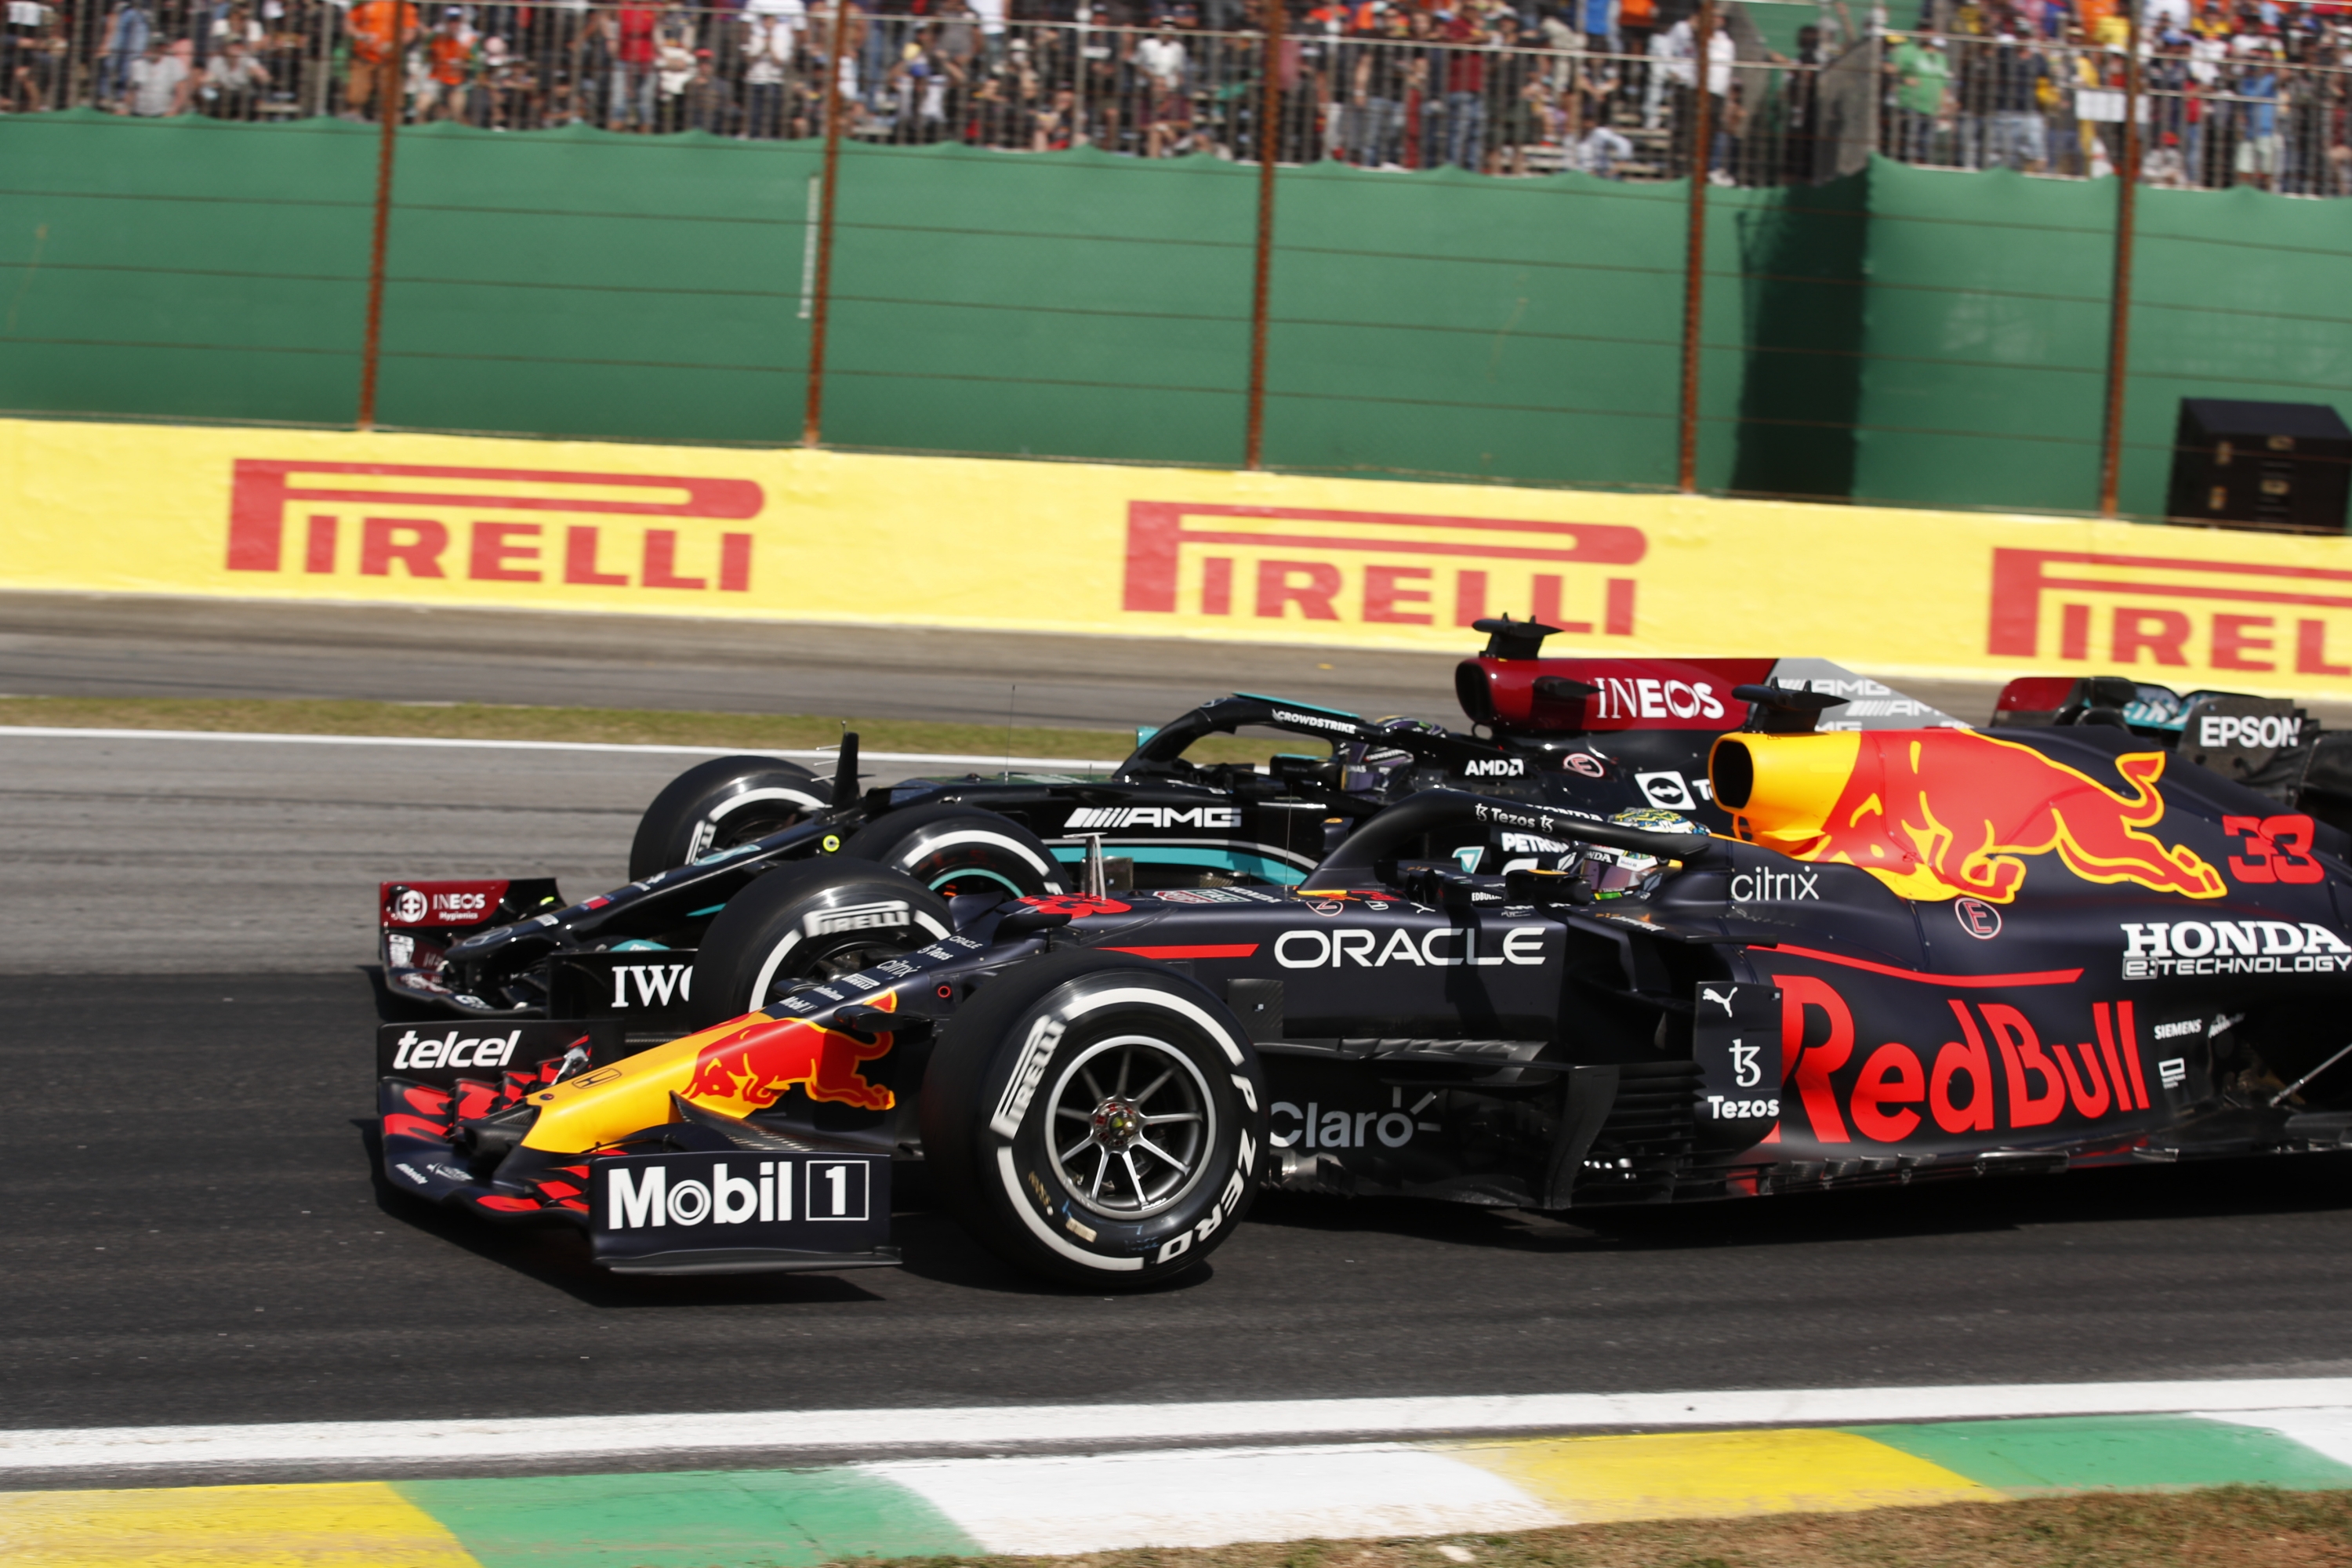 Verstappen and Hamilton had a number of wheel-to-wheel battles in 2021.